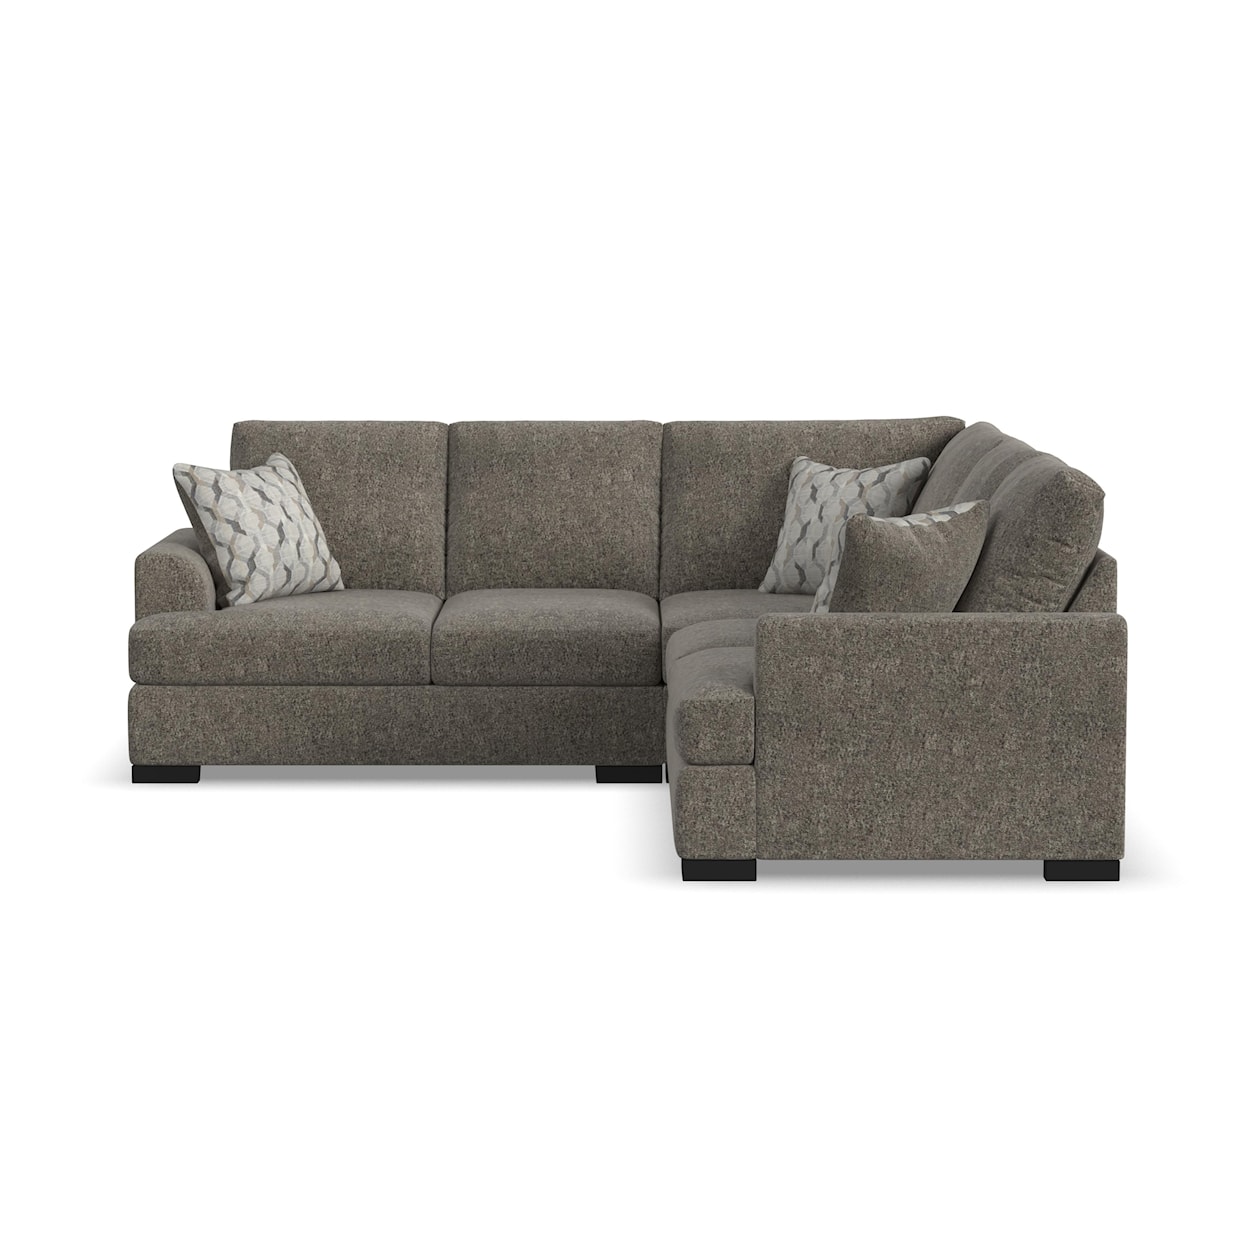 Flexsteel Charisma - Willow L-Shaped Sectional